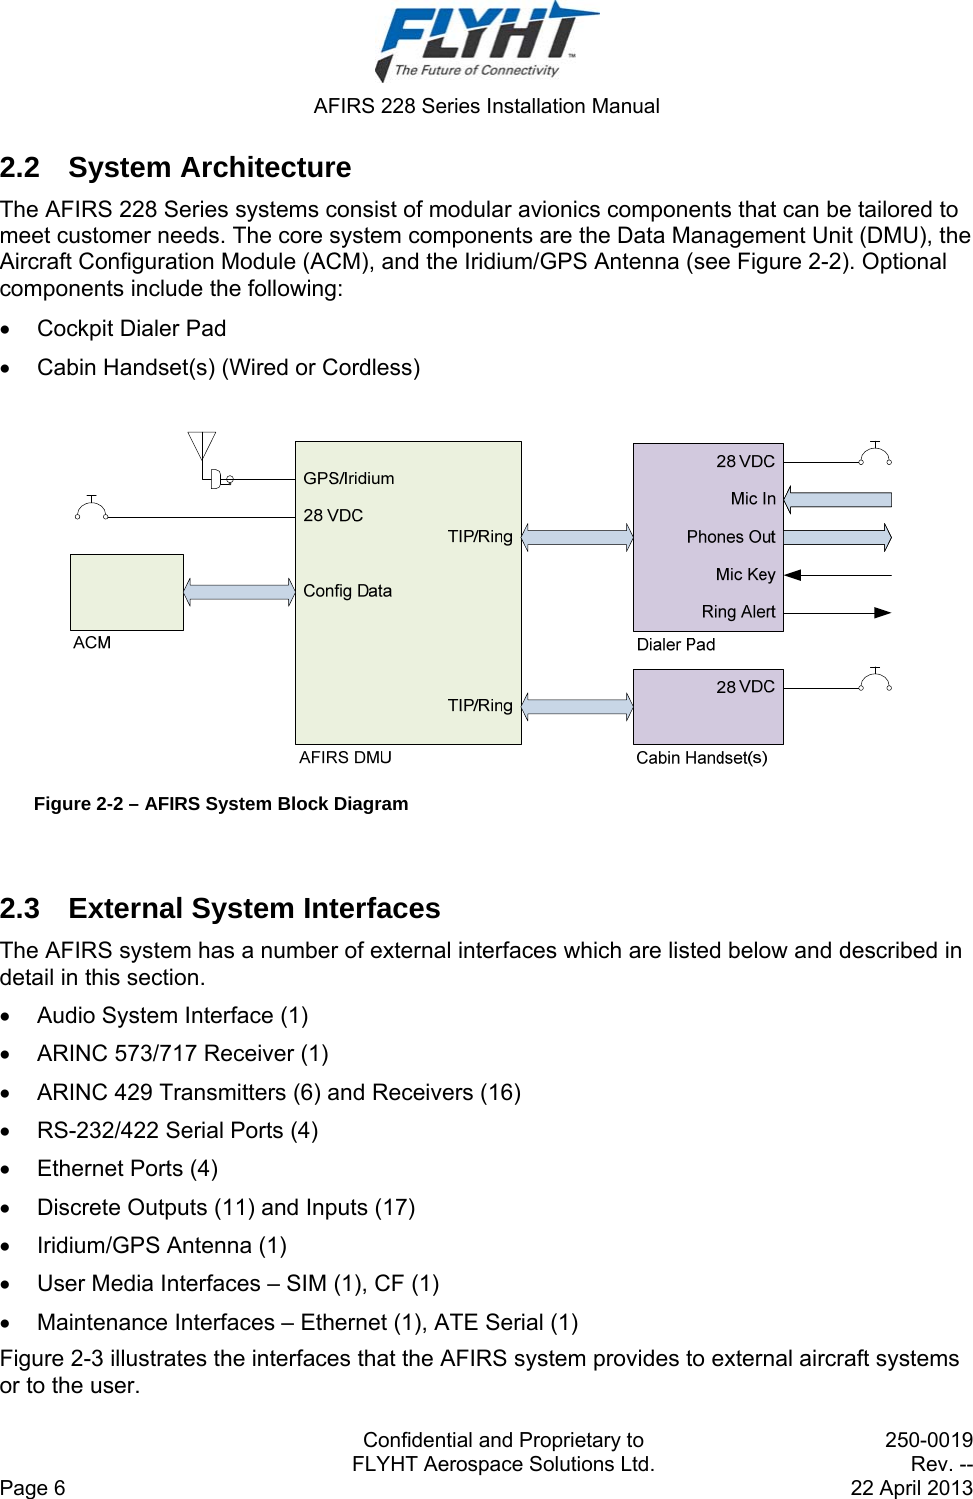  AFIRS 228 Series Installation Manual   Confidential and Proprietary to  250-0019   FLYHT Aerospace Solutions Ltd.  Rev. -- Page 6    22 April 2013 2.2 System Architecture The AFIRS 228 Series systems consist of modular avionics components that can be tailored to meet customer needs. The core system components are the Data Management Unit (DMU), the Aircraft Configuration Module (ACM), and the Iridium/GPS Antenna (see Figure 2-2). Optional components include the following:   Cockpit Dialer Pad   Cabin Handset(s) (Wired or Cordless)   Figure 2-2 – AFIRS System Block Diagram  2.3  External System Interfaces The AFIRS system has a number of external interfaces which are listed below and described in detail in this section.    Audio System Interface (1)   ARINC 573/717 Receiver (1)   ARINC 429 Transmitters (6) and Receivers (16)   RS-232/422 Serial Ports (4)   Ethernet Ports (4)   Discrete Outputs (11) and Inputs (17)   Iridium/GPS Antenna (1)   User Media Interfaces – SIM (1), CF (1)   Maintenance Interfaces – Ethernet (1), ATE Serial (1) Figure 2-3 illustrates the interfaces that the AFIRS system provides to external aircraft systems or to the user.  